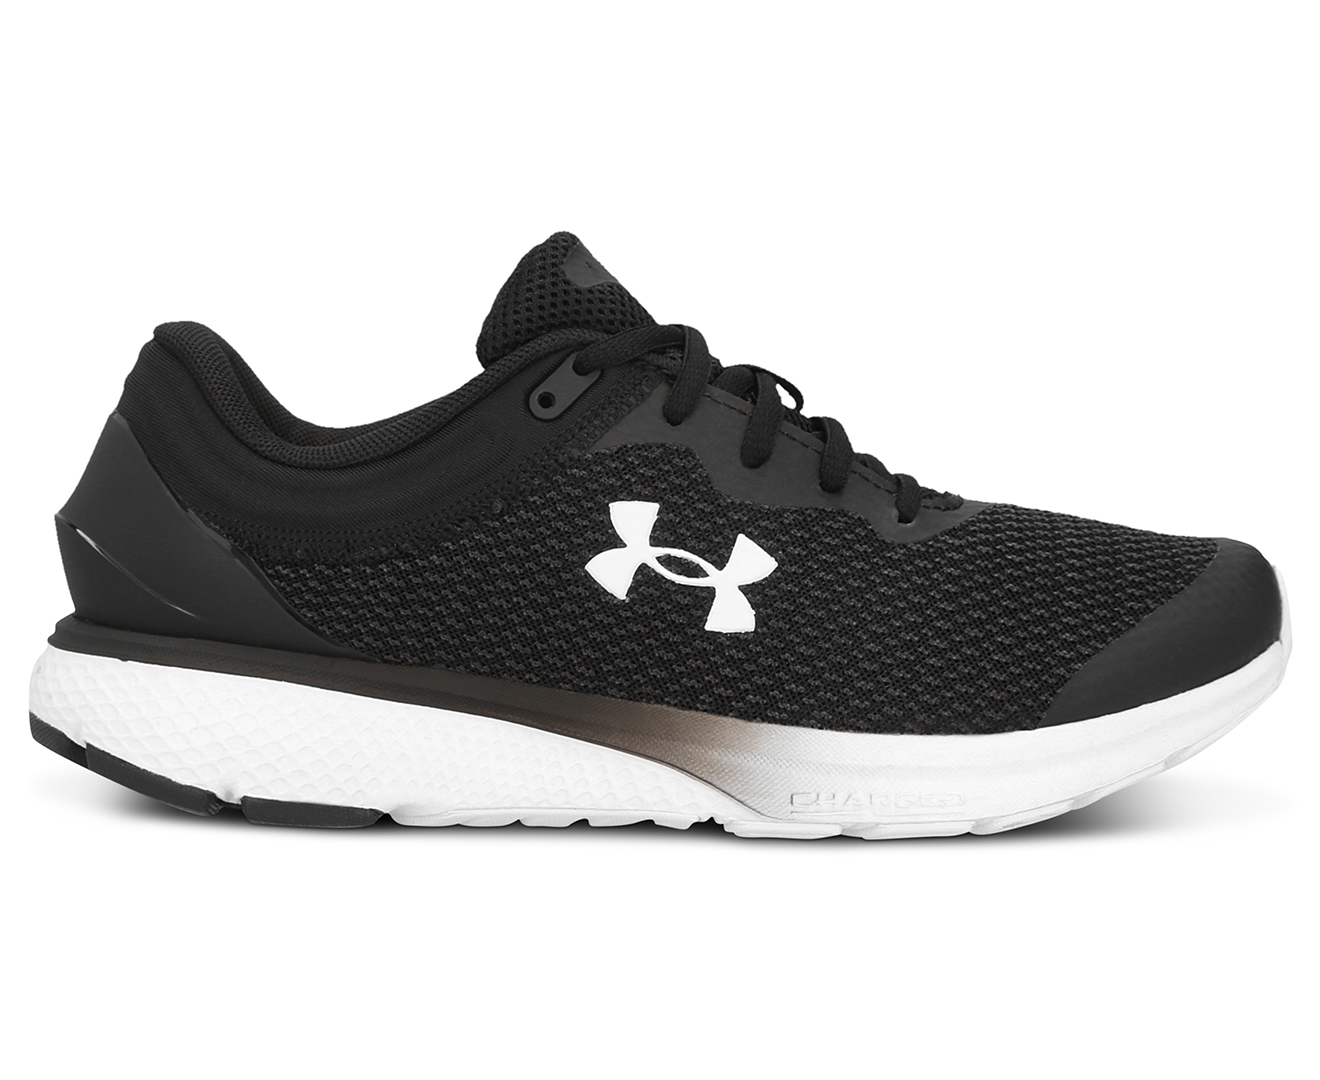 Under Armour Women's Charged Escape 3 Running Shoes - Black/White ...